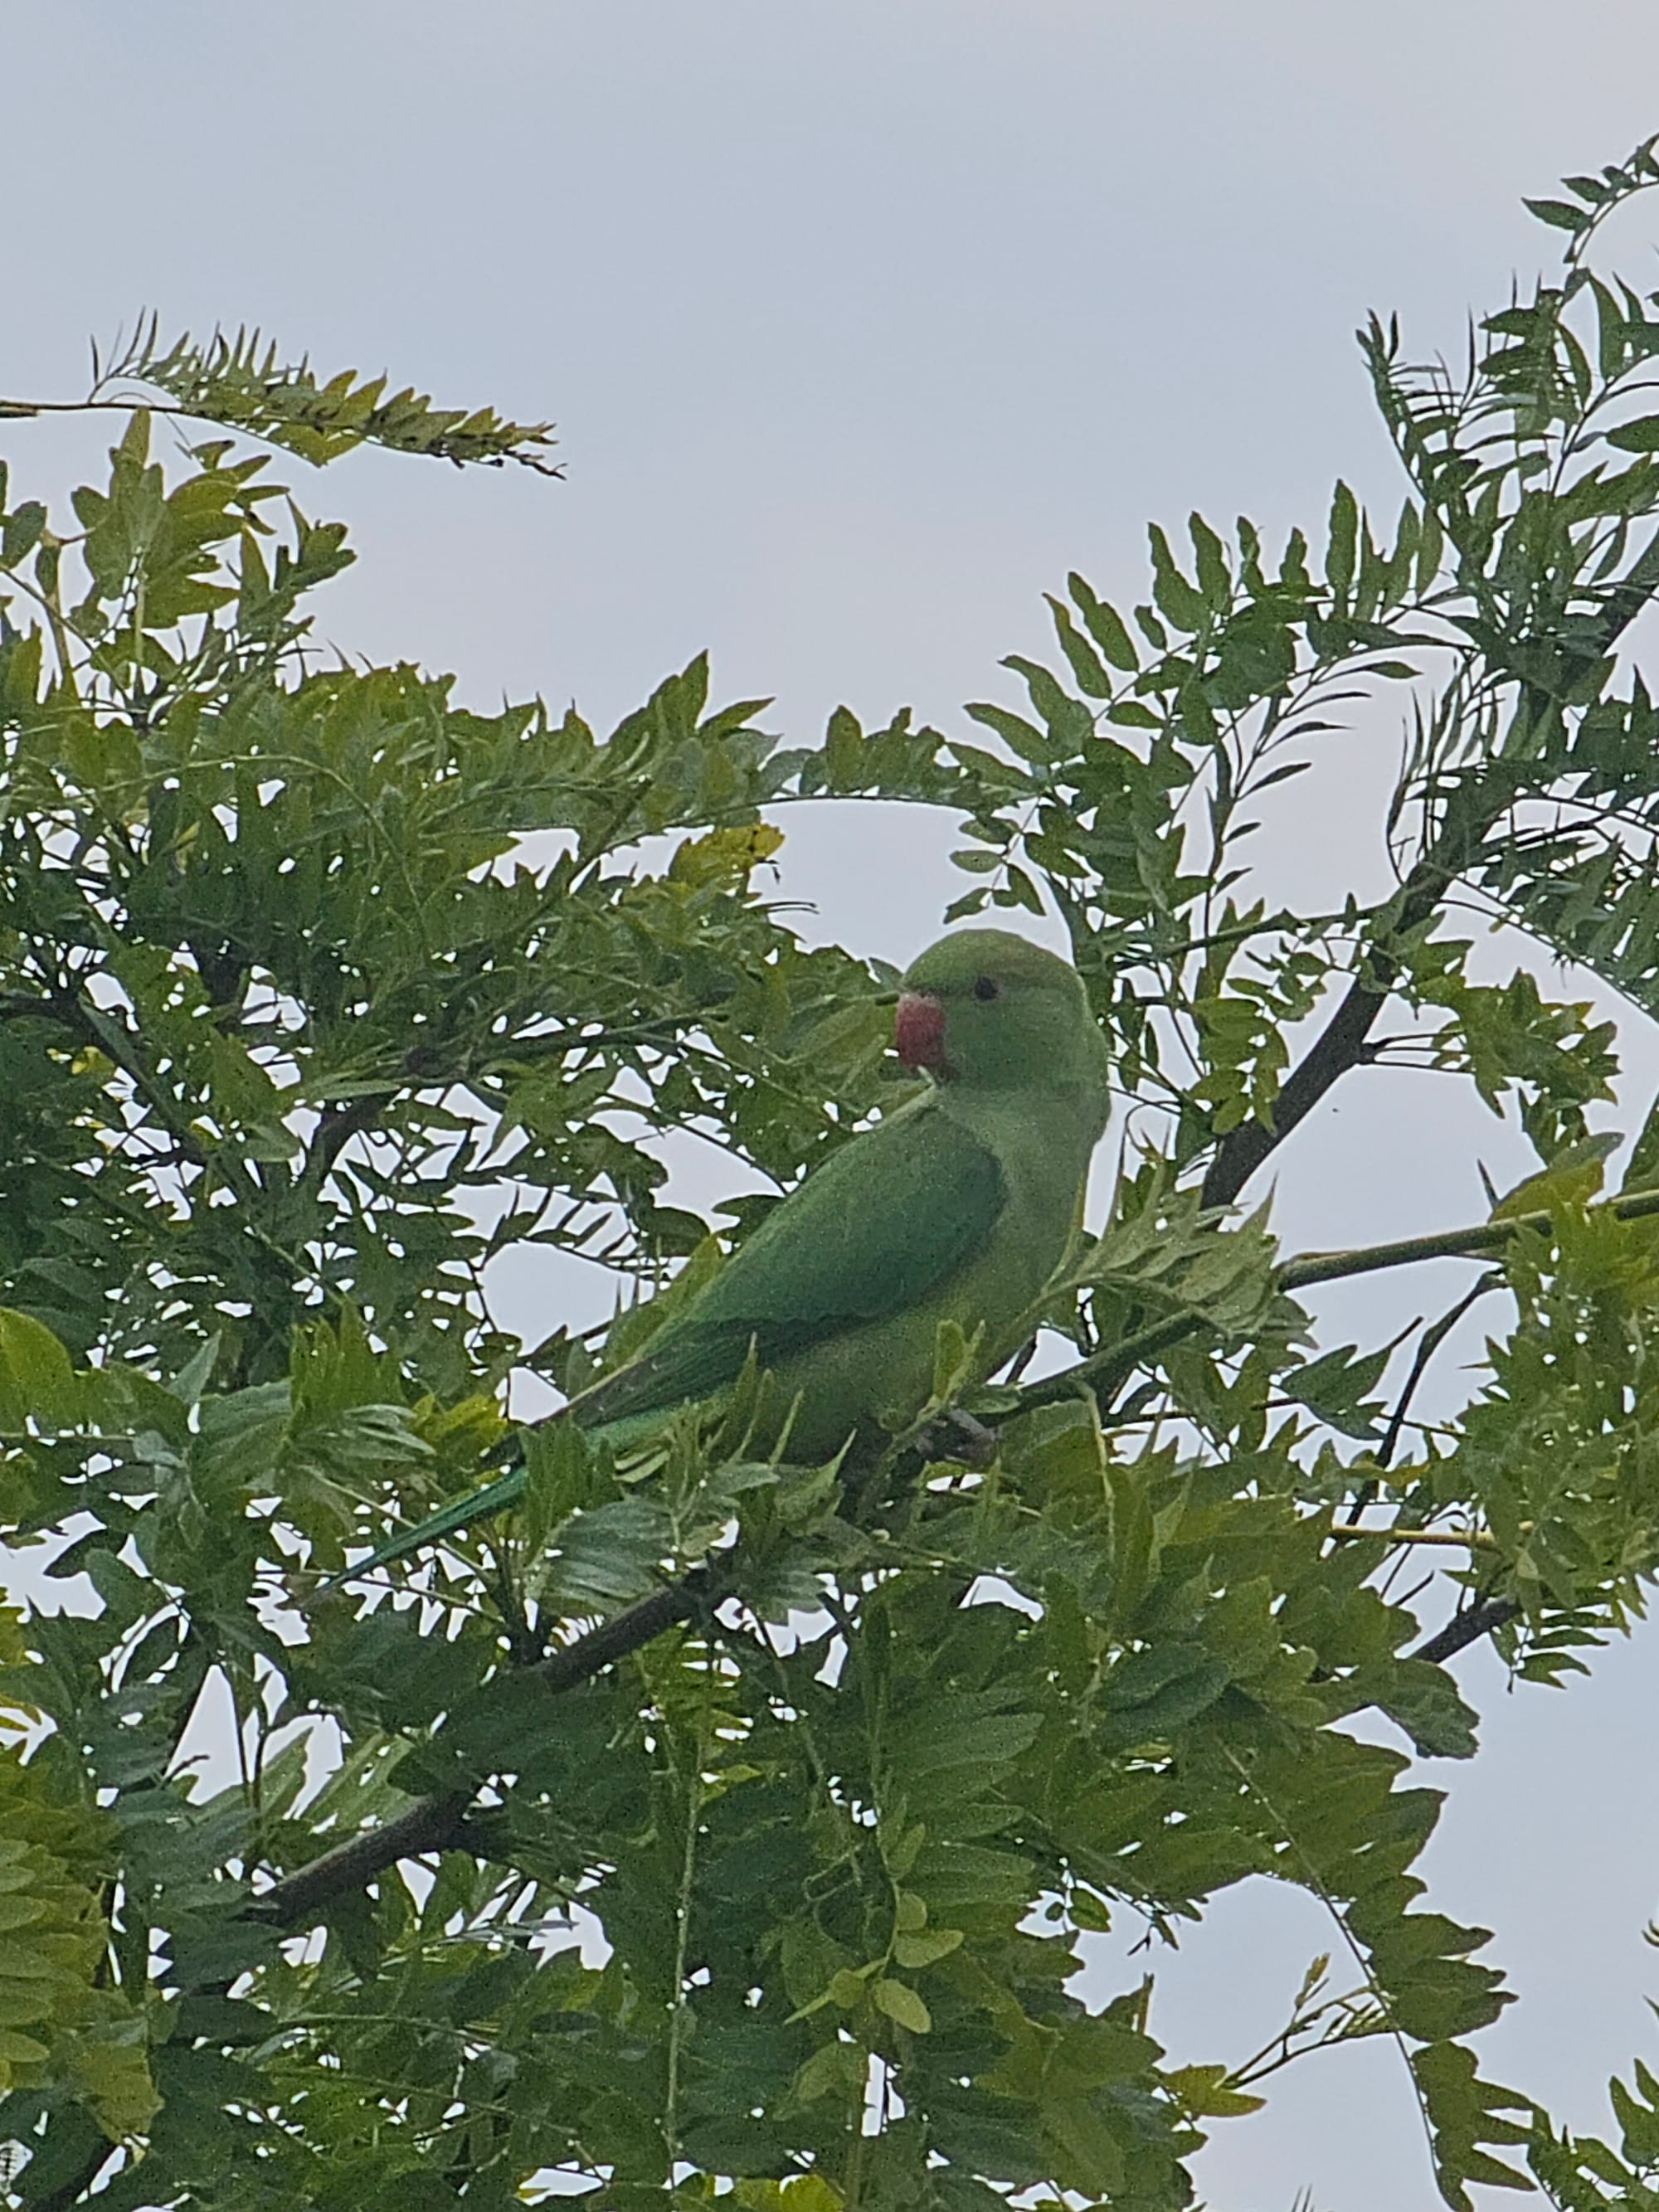 A parakeet on a branch in the middle of lush greenery 